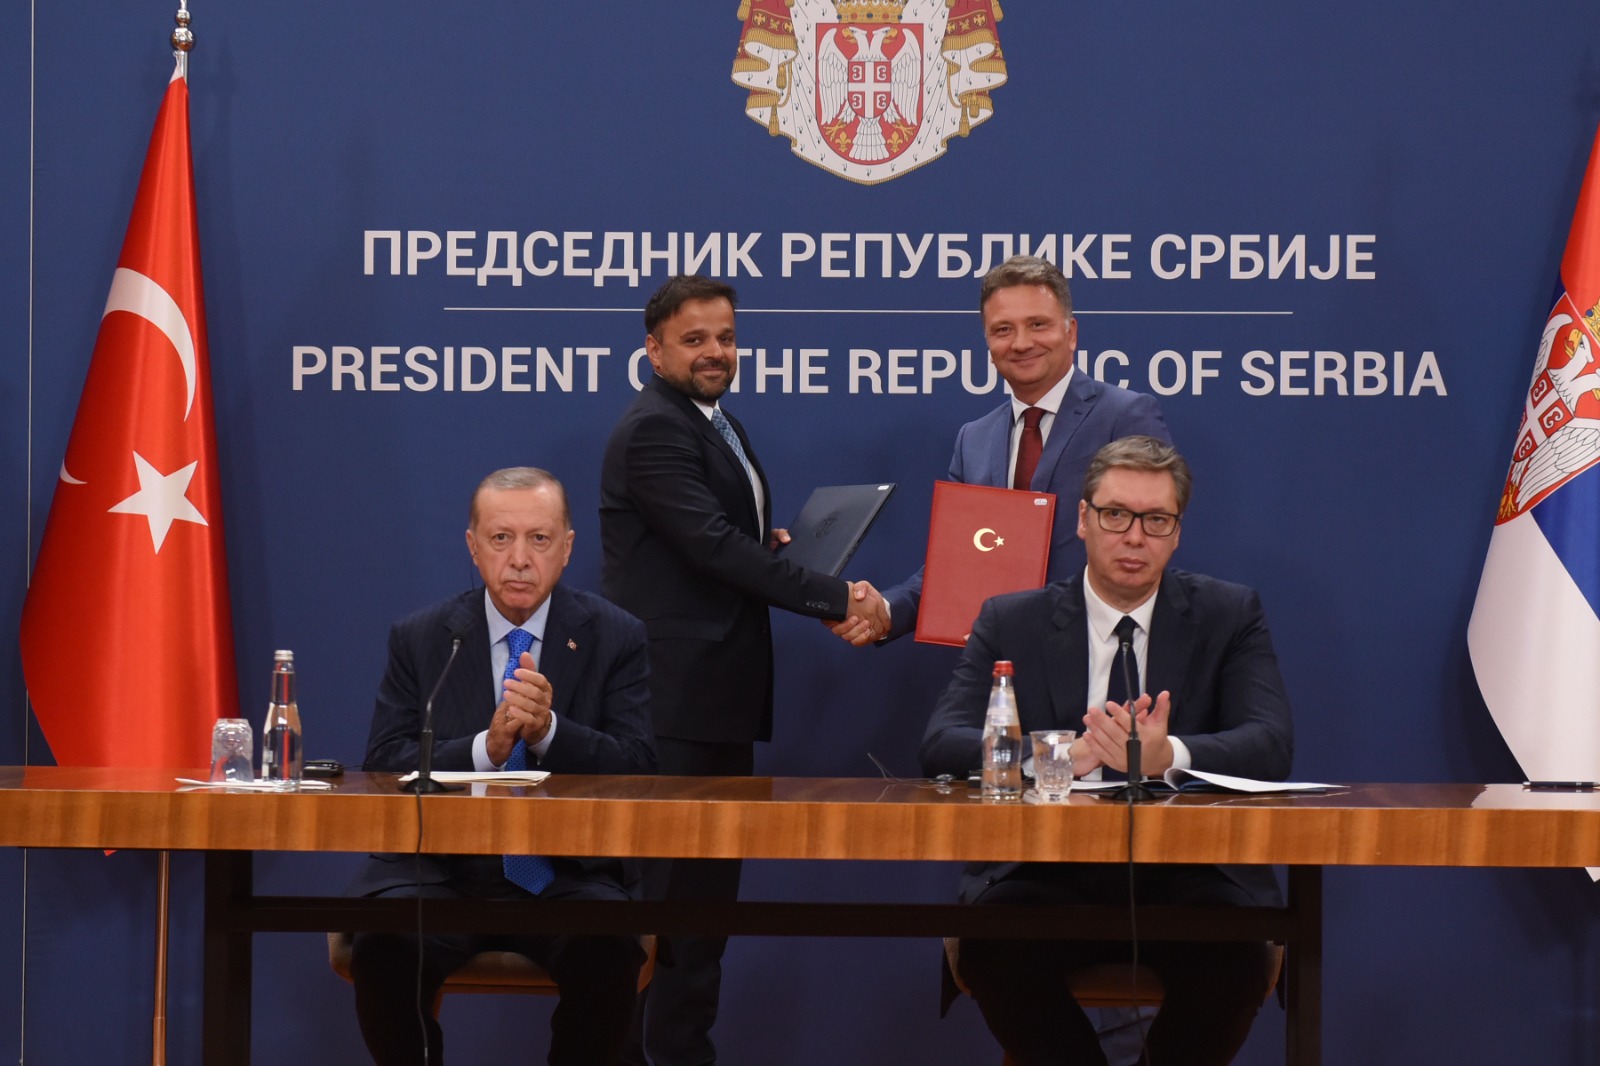 During the visit of the President of the Republic of Turkey, a Memorandum of Cooperation in the field of eGovernment was signed